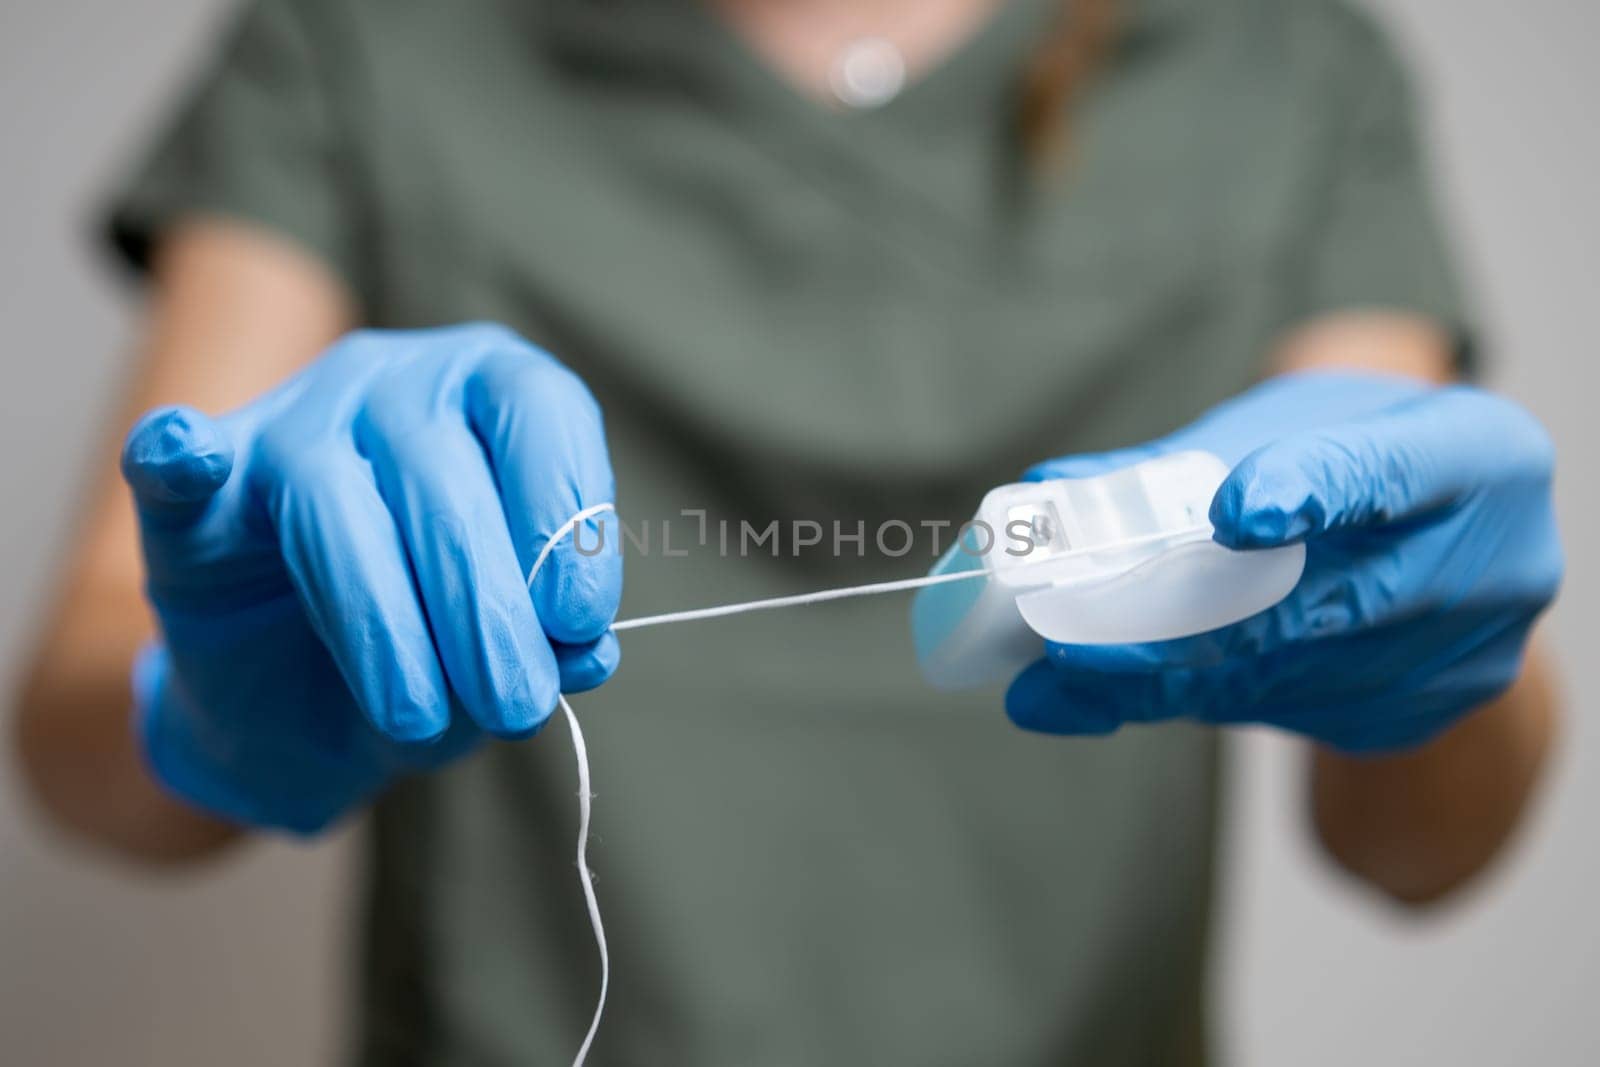 Oral thread or dental floss held by a dental professional wearing rubber gloves.